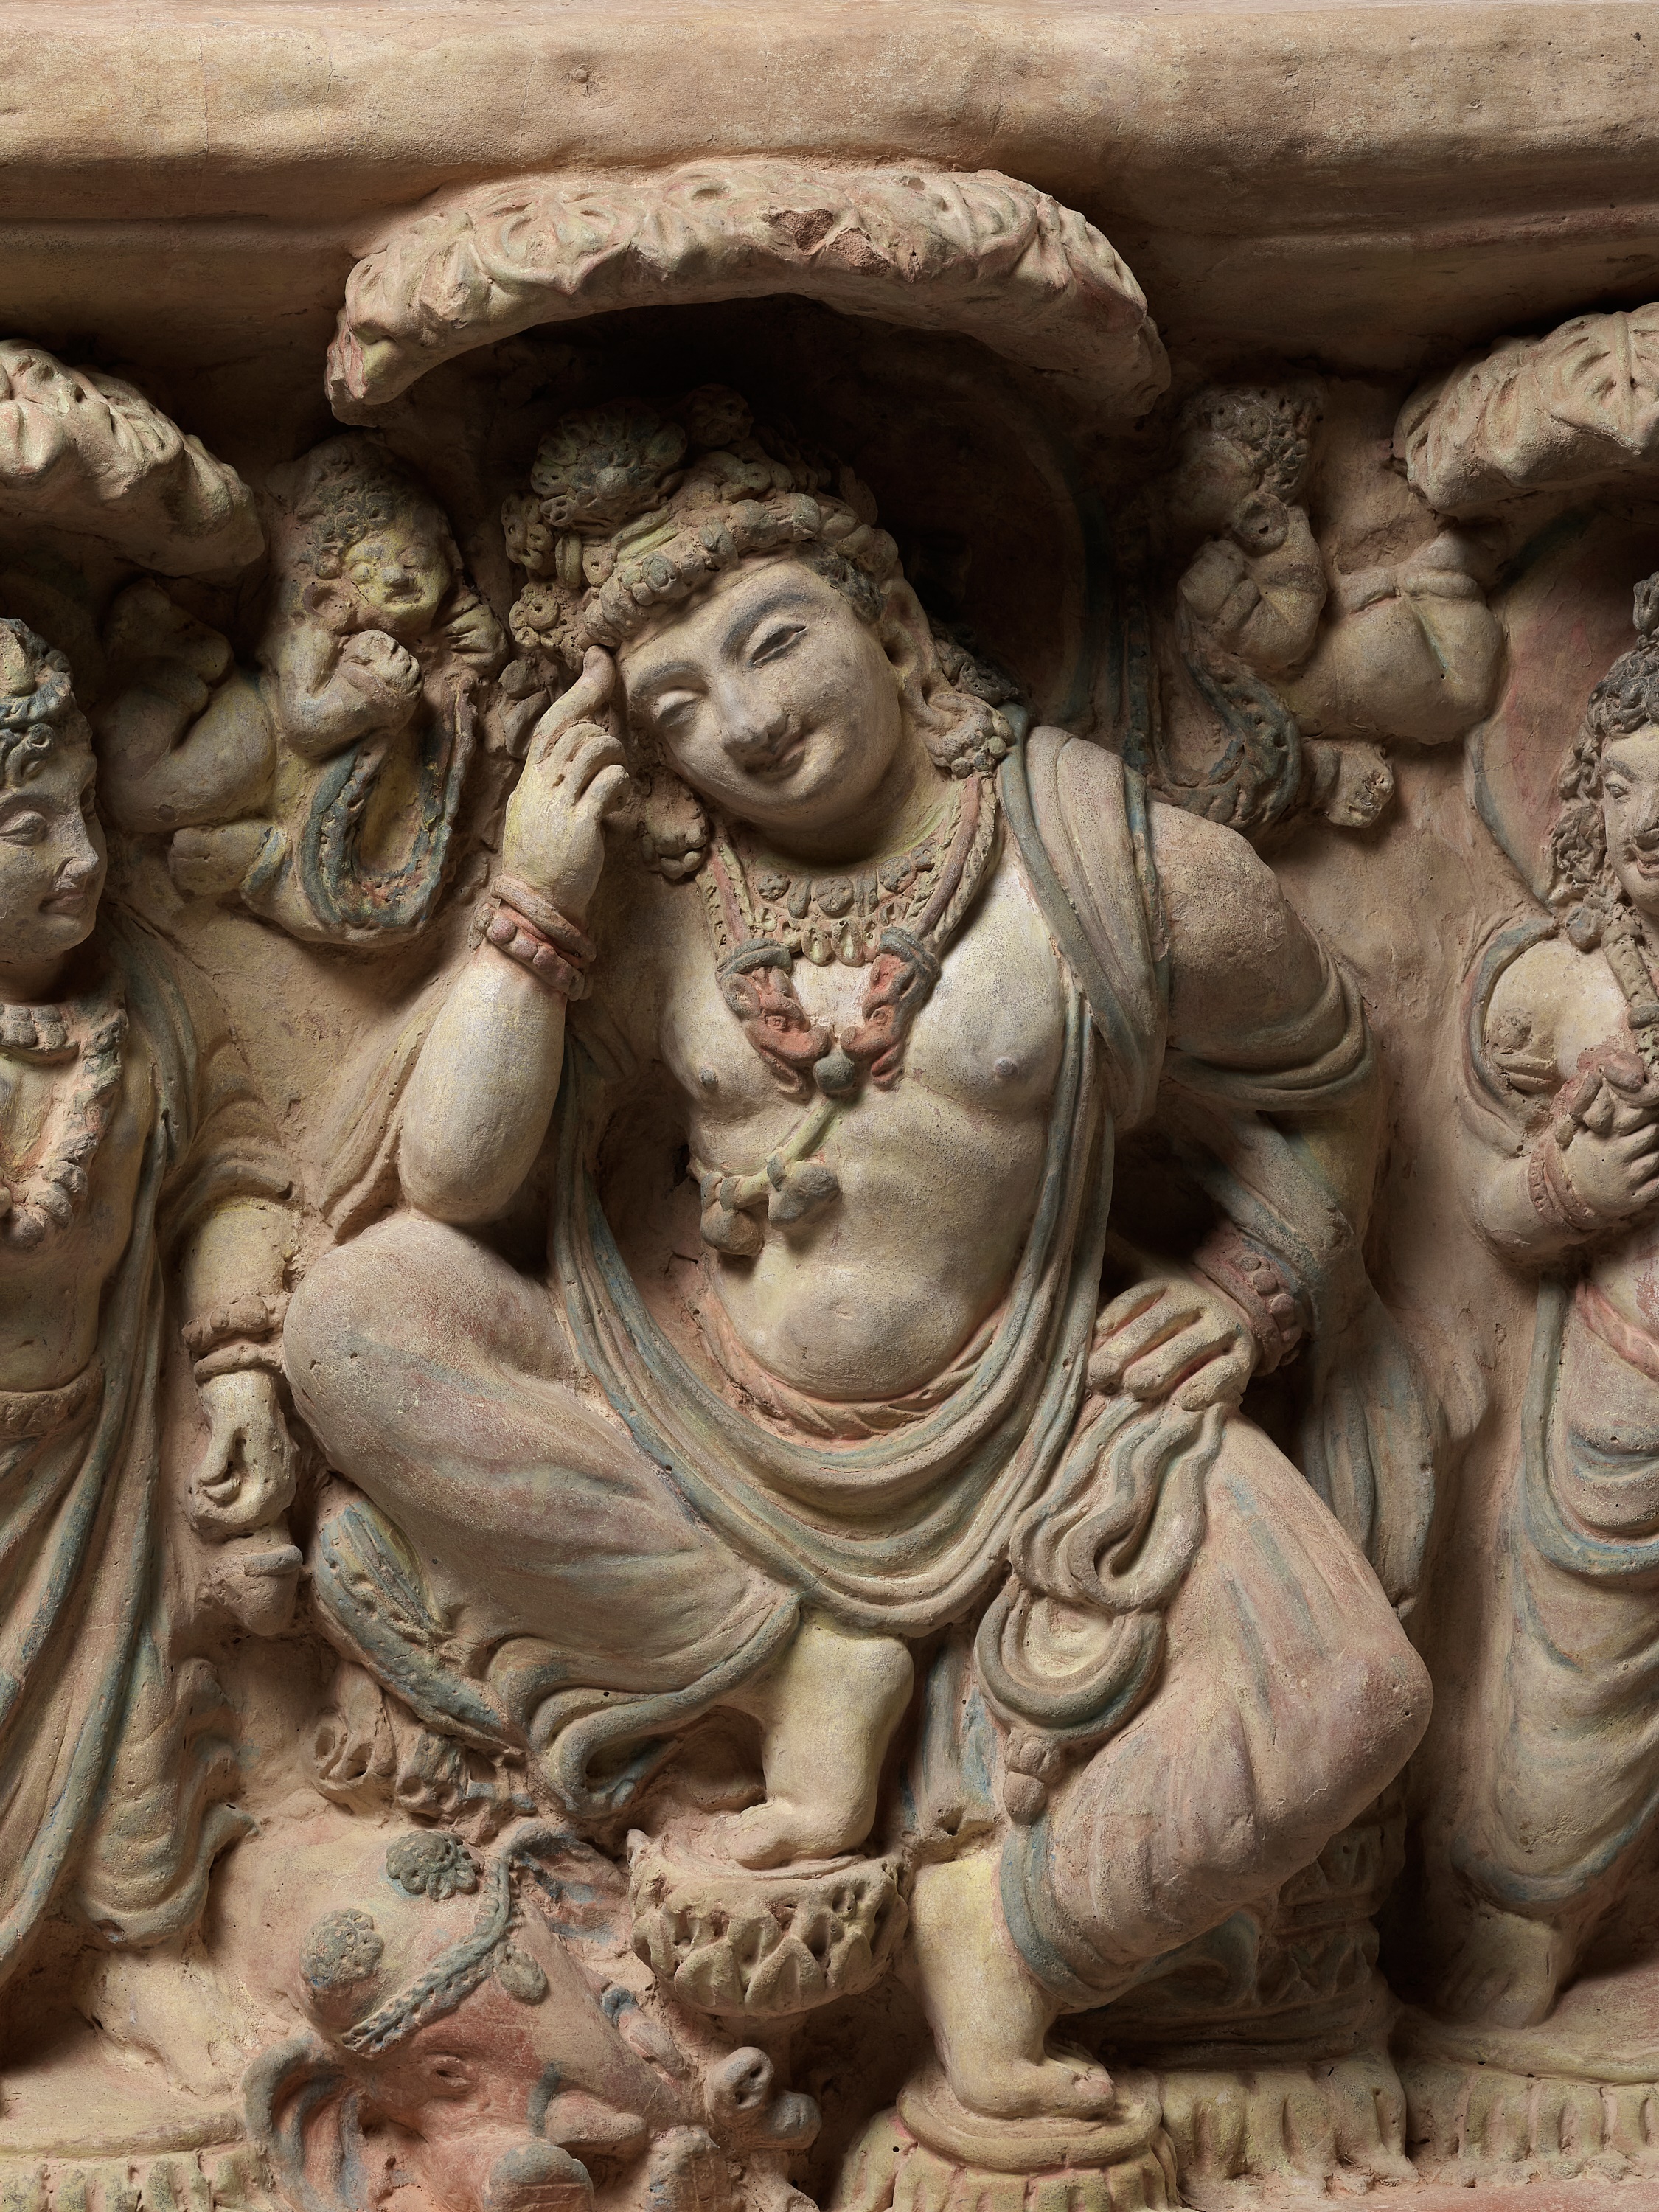 A TERRACOTTA RELIEF OF A THINKING PRINCE SIDDHARTA UNDER THE BODHI TREE, ANCIENT REGION OF GANDHARA - Image 10 of 19